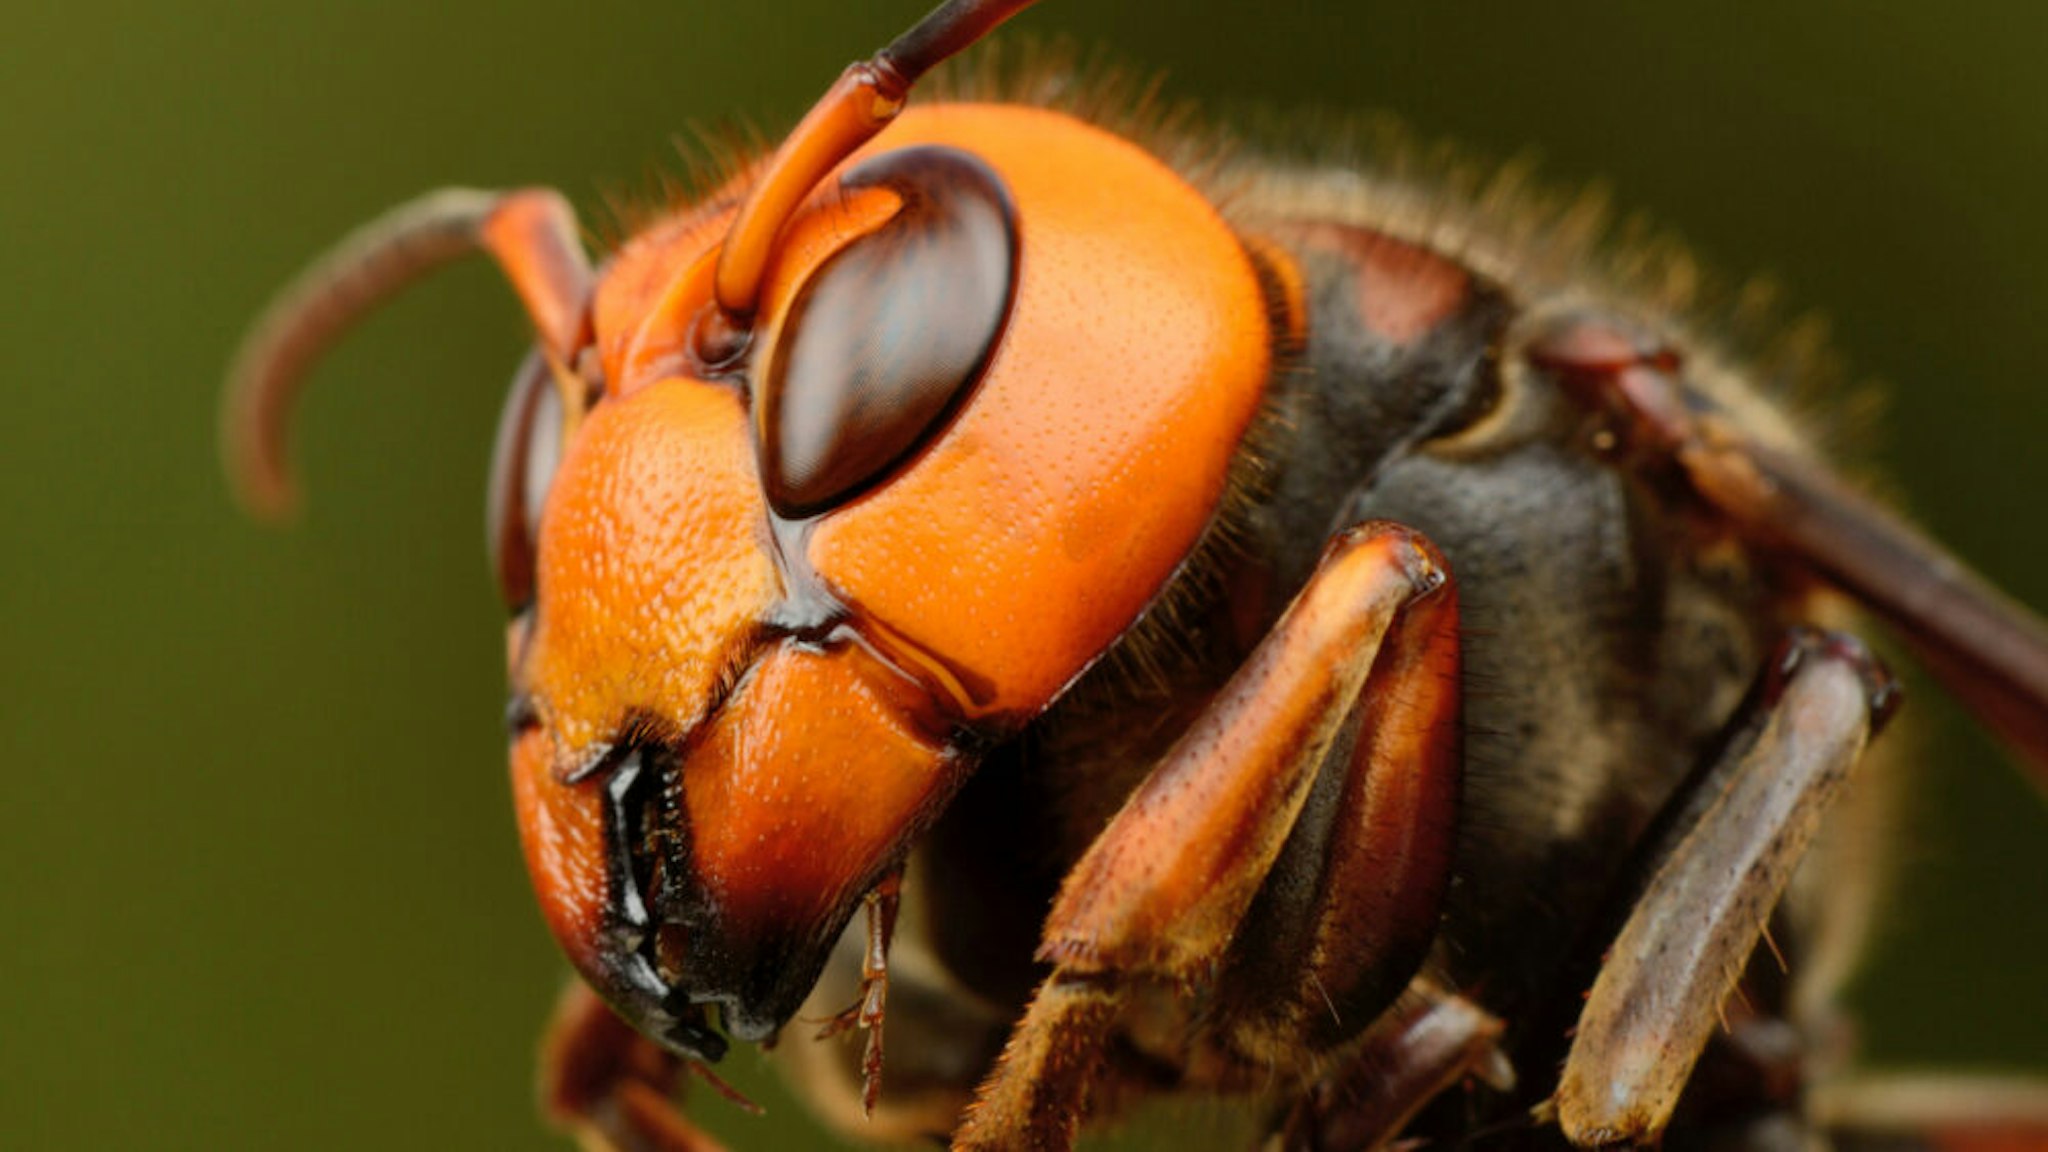 Close-up of Japanese giant hornet.